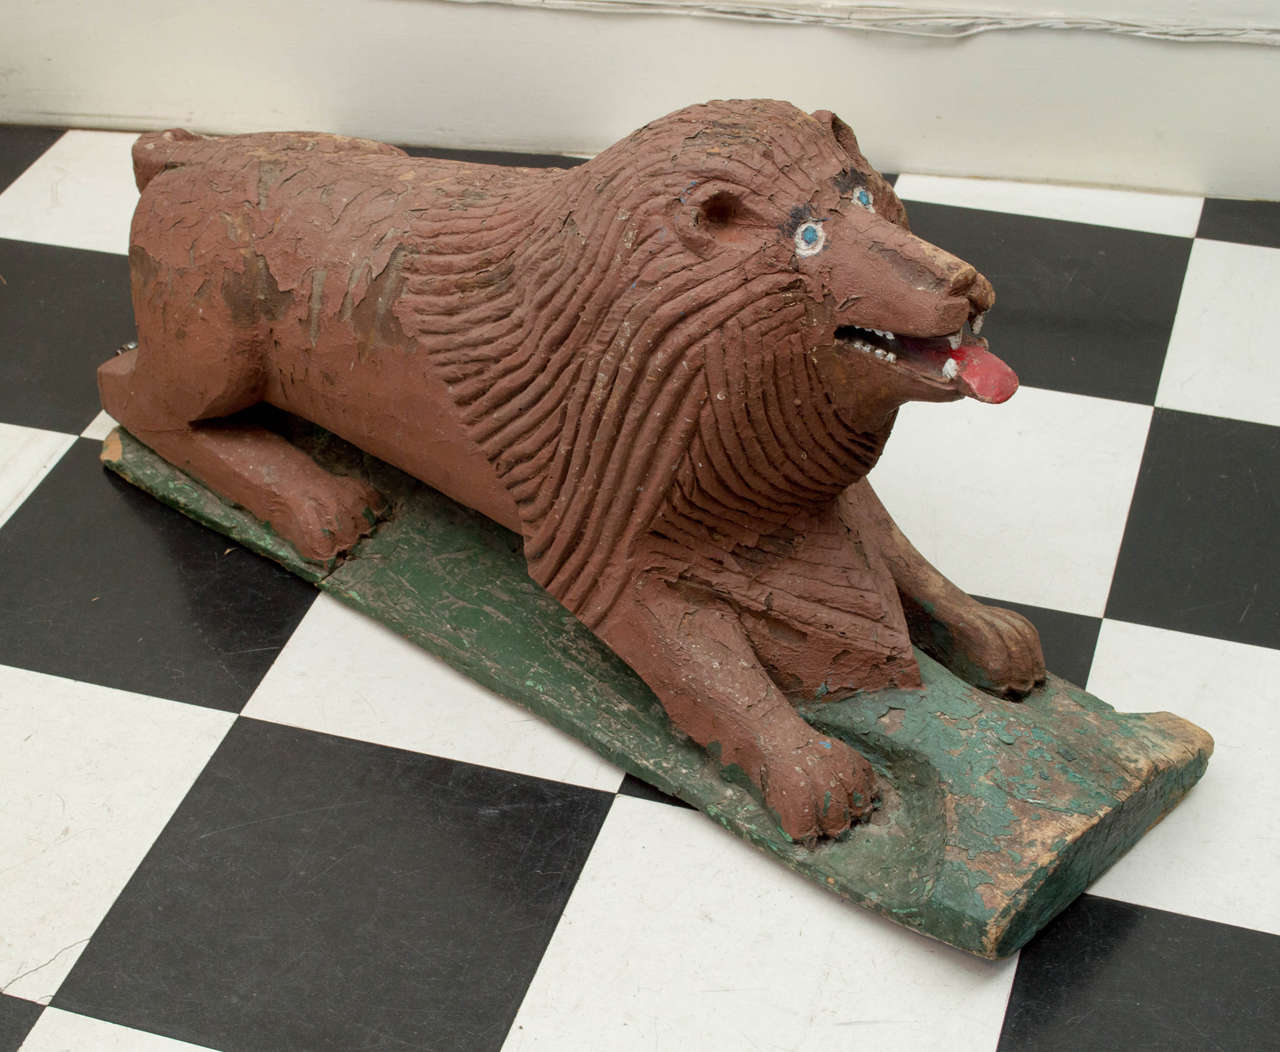 20th century American folk art carved lion in a seated position.  Old weathered  textured finish and paint. Carved from a small log. Tail repaired.